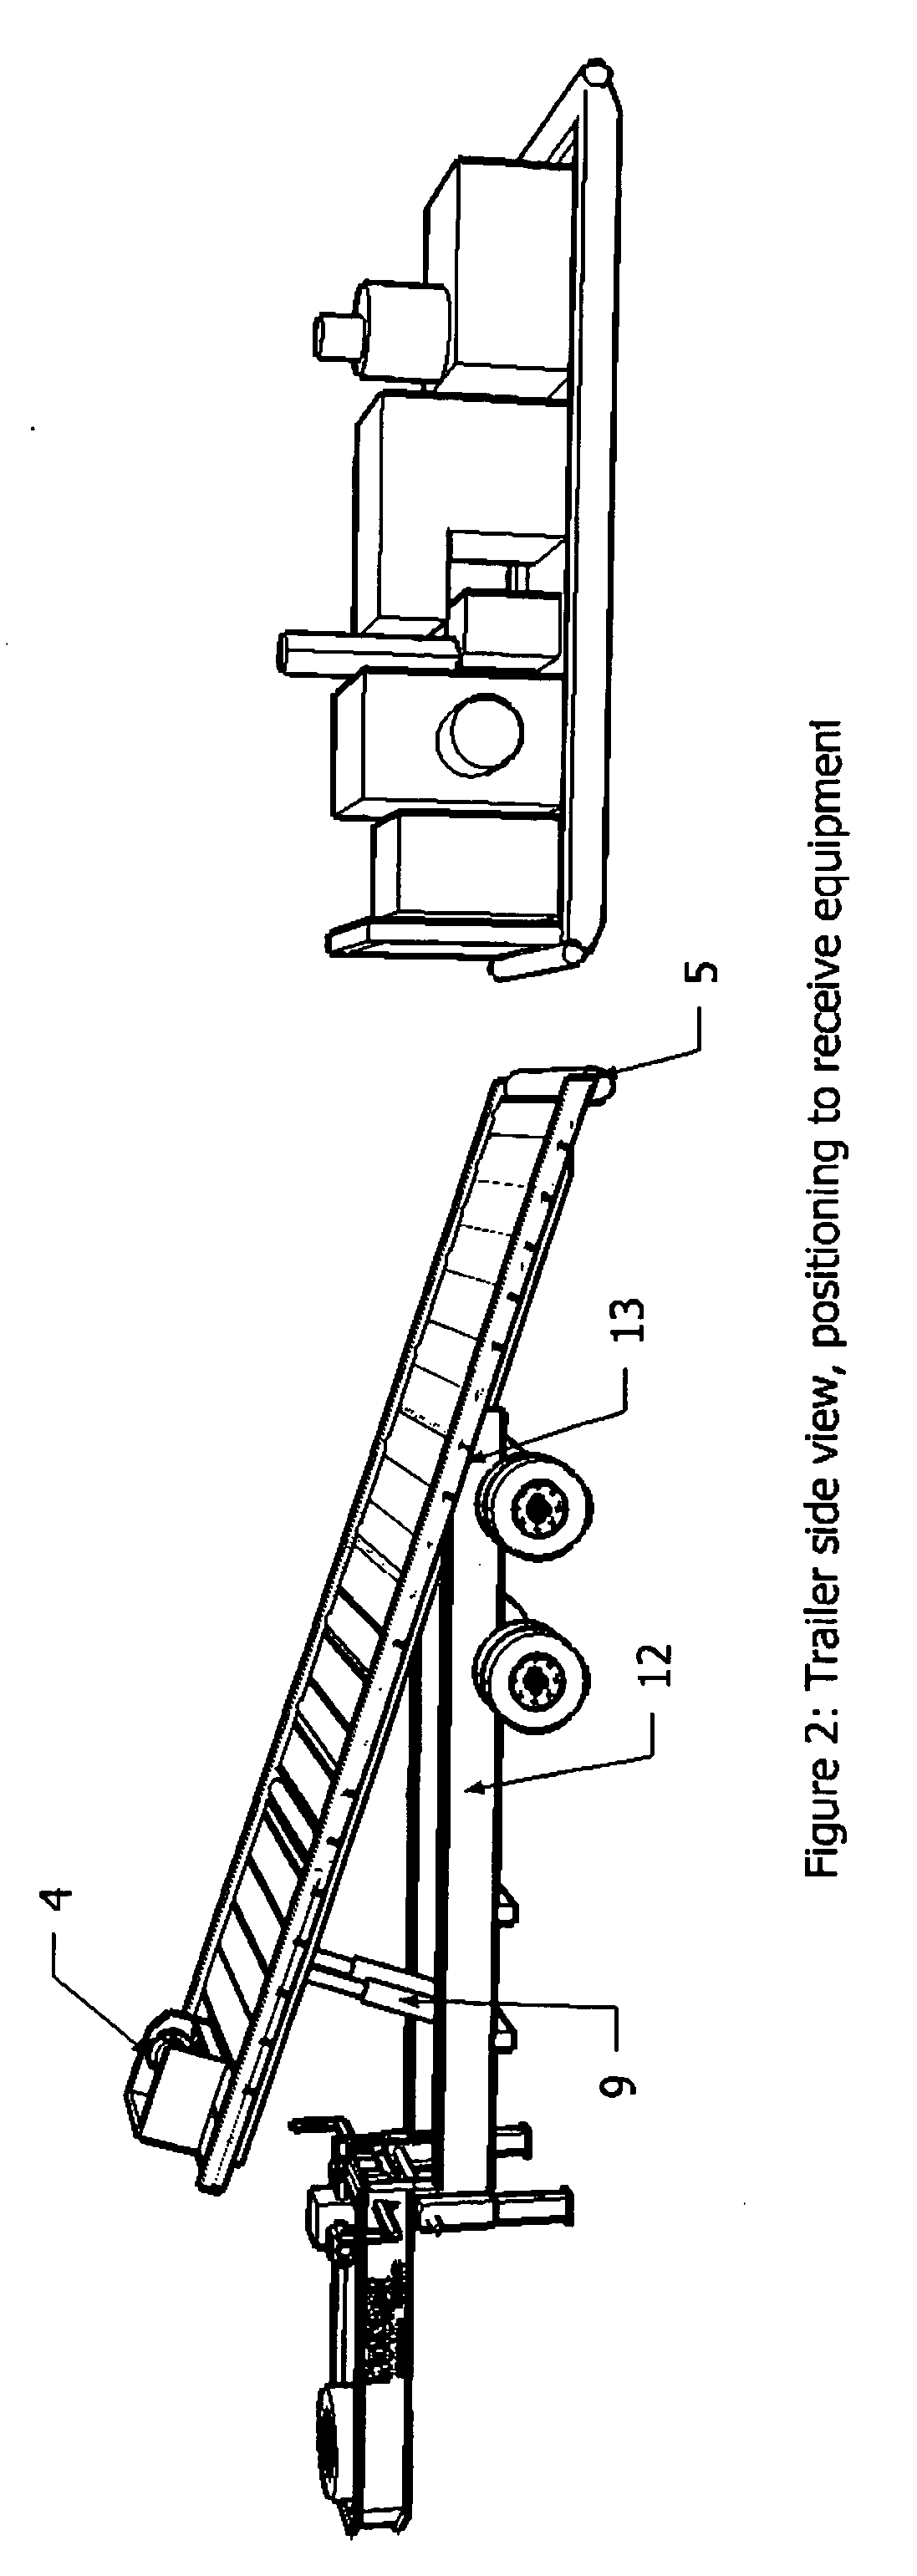 Tilting Flatbed Trailer for Loading, Transporting, Unloading and Placement of Heavy Field Equipment